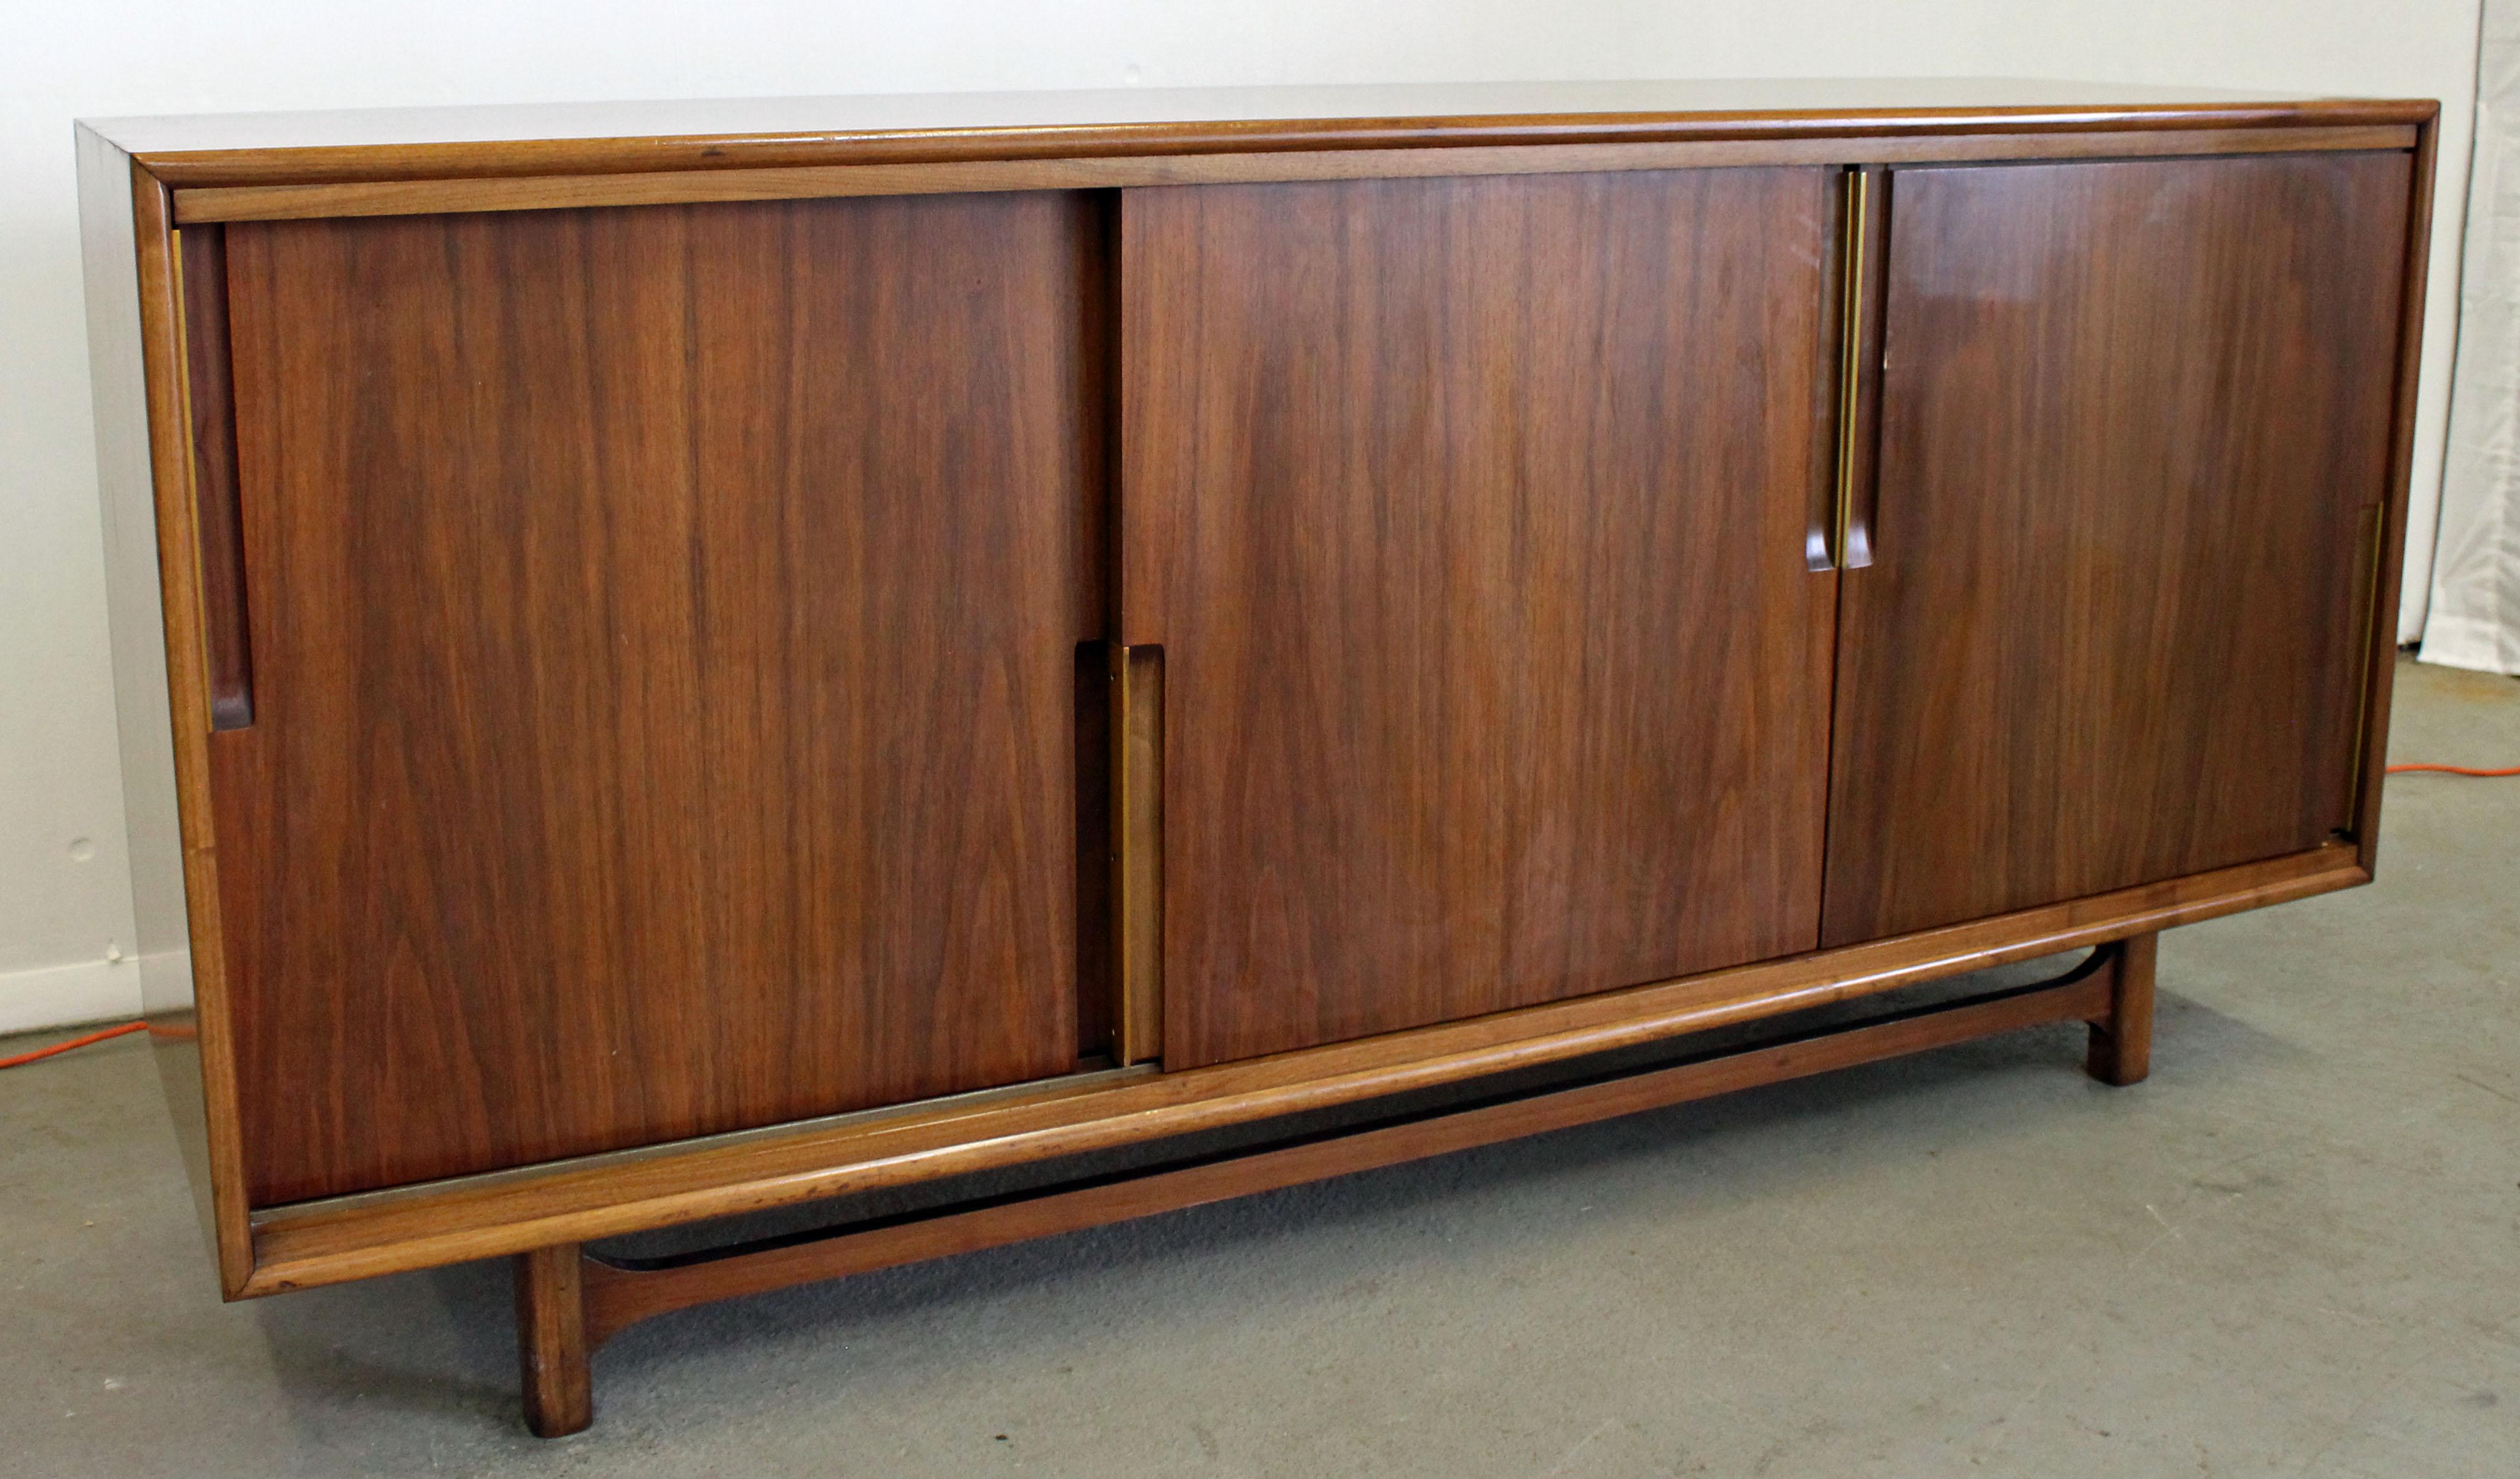 Offered is a Mid-Century Modern walnut credenza by Cavalier. Features nine drawers behind removable sliding doors with brass trim inset handles, a sculpted stretcher, and attractive walnut grain. Can be used as a dresser, sideboard or credenza. It